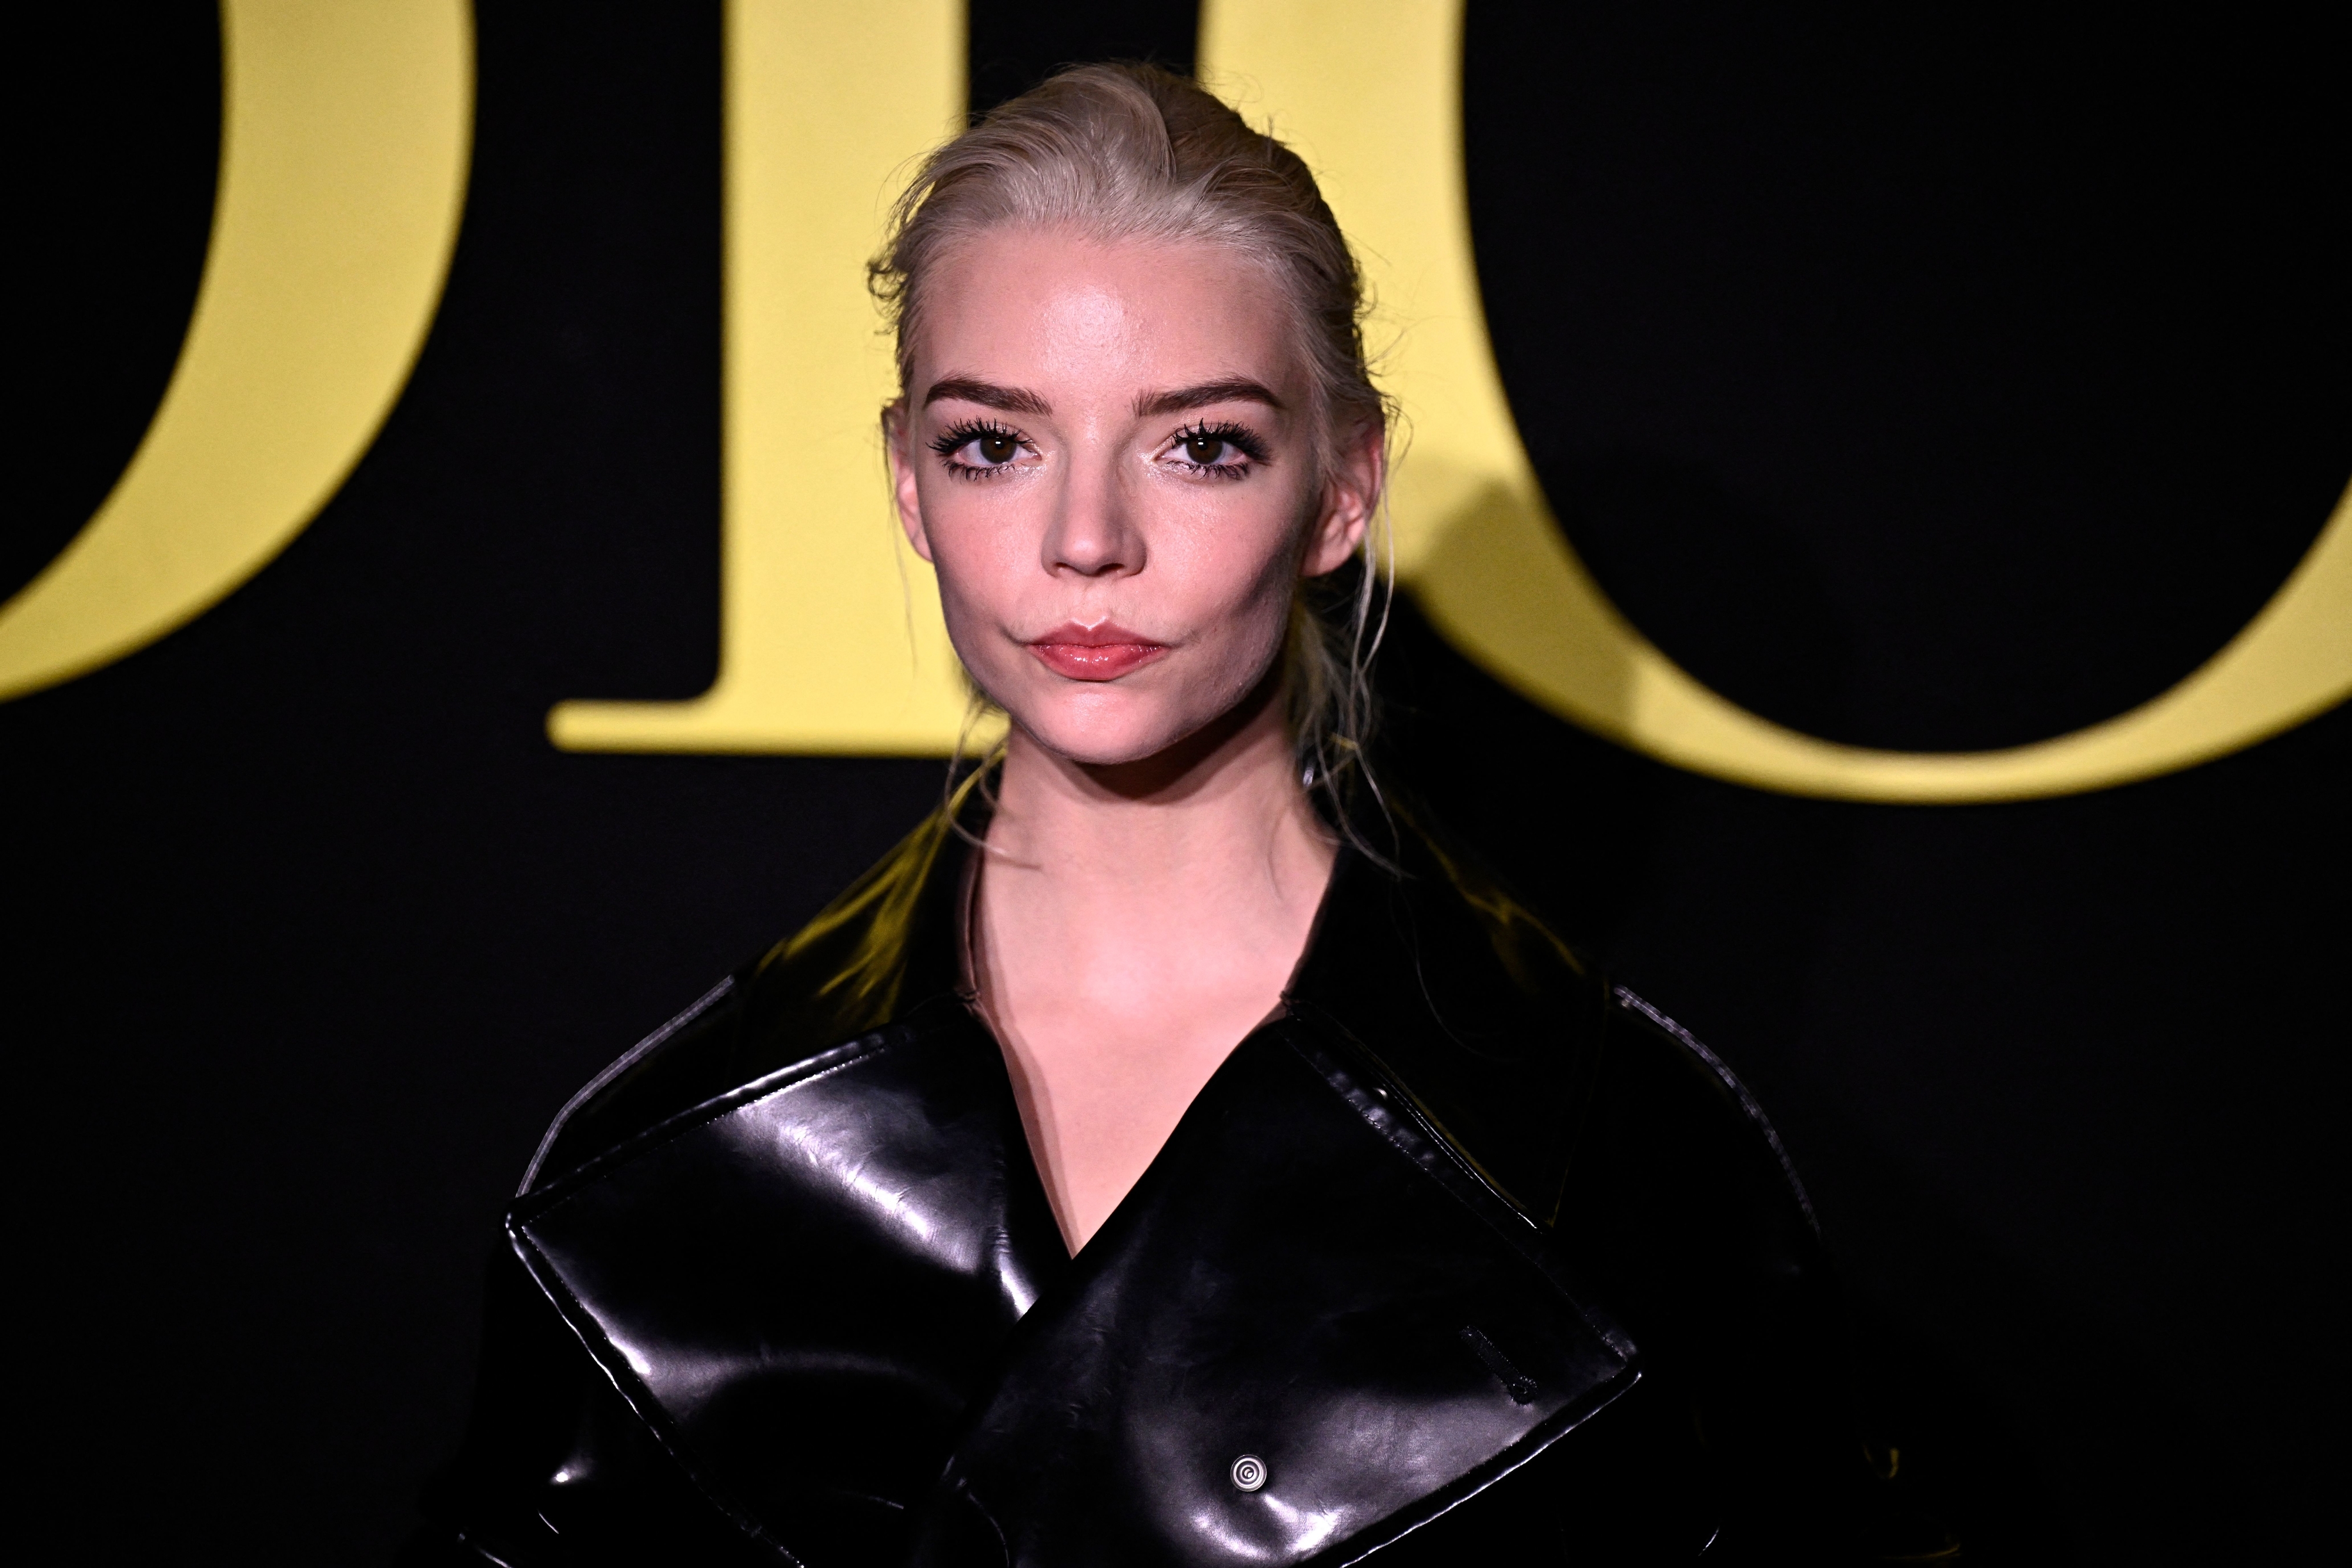 Anya Taylor-Joy is reportedly married to Malcolm McRae